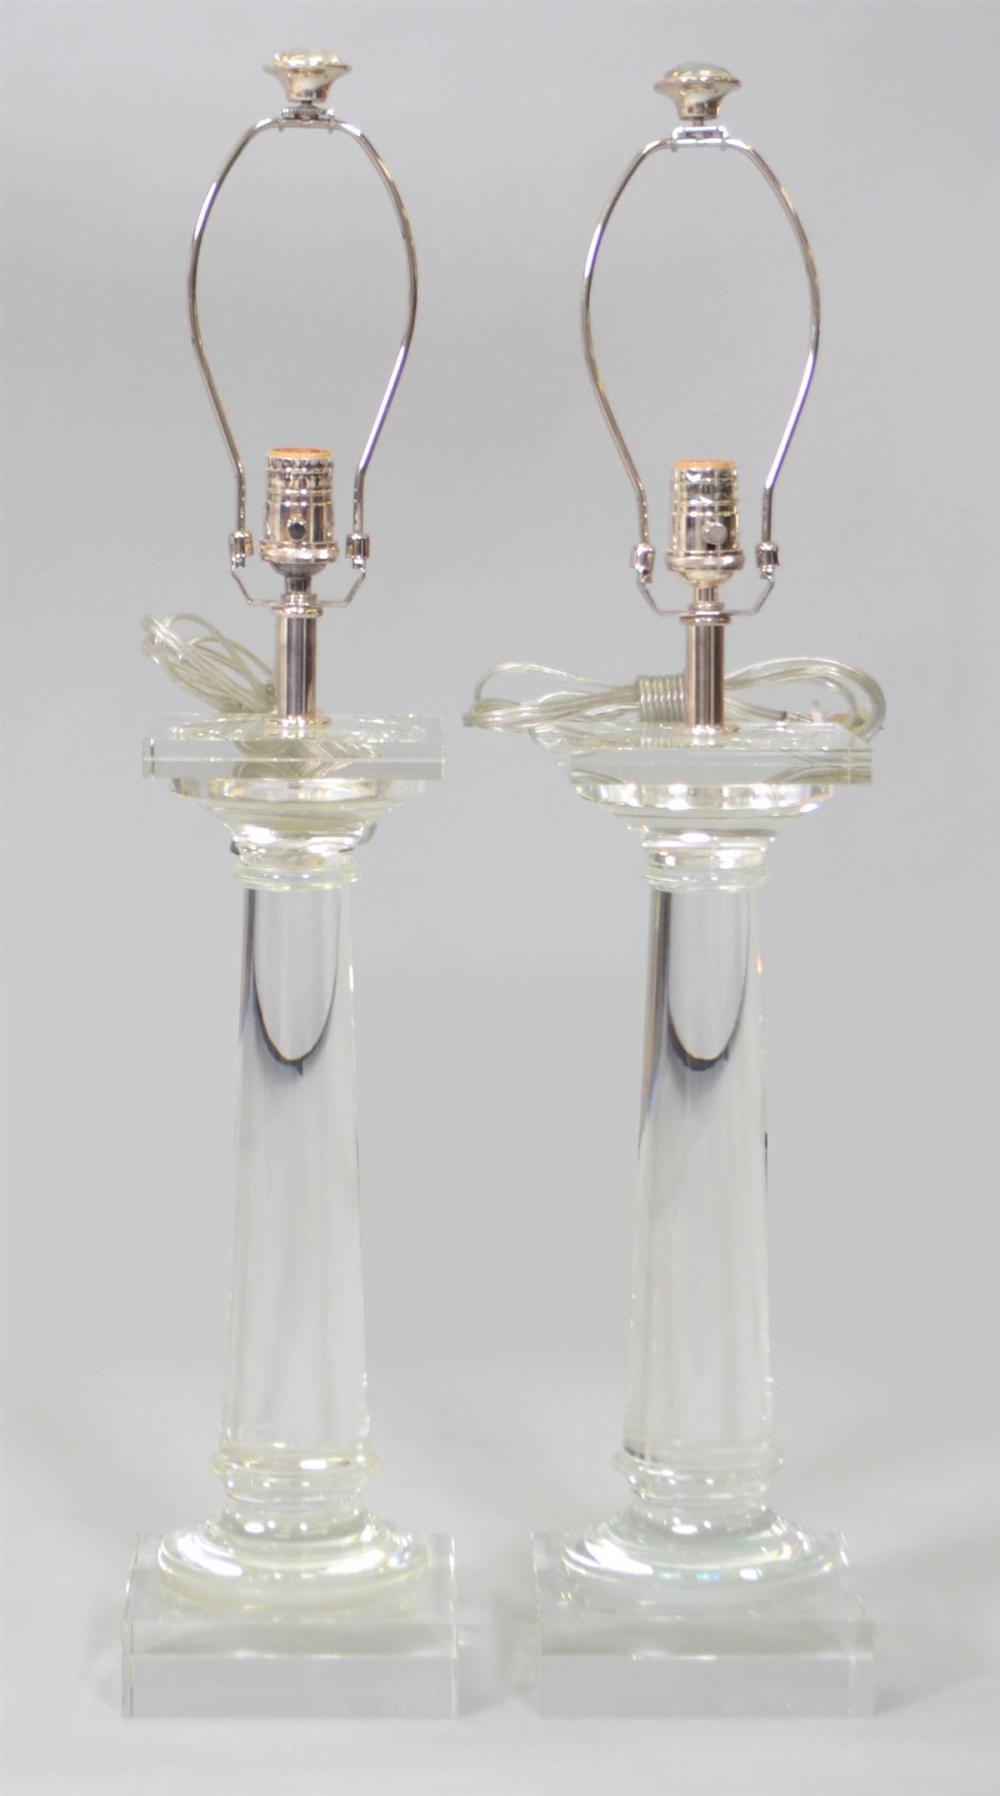 PAIR OF NEOCLASSICAL STYLE GLASS